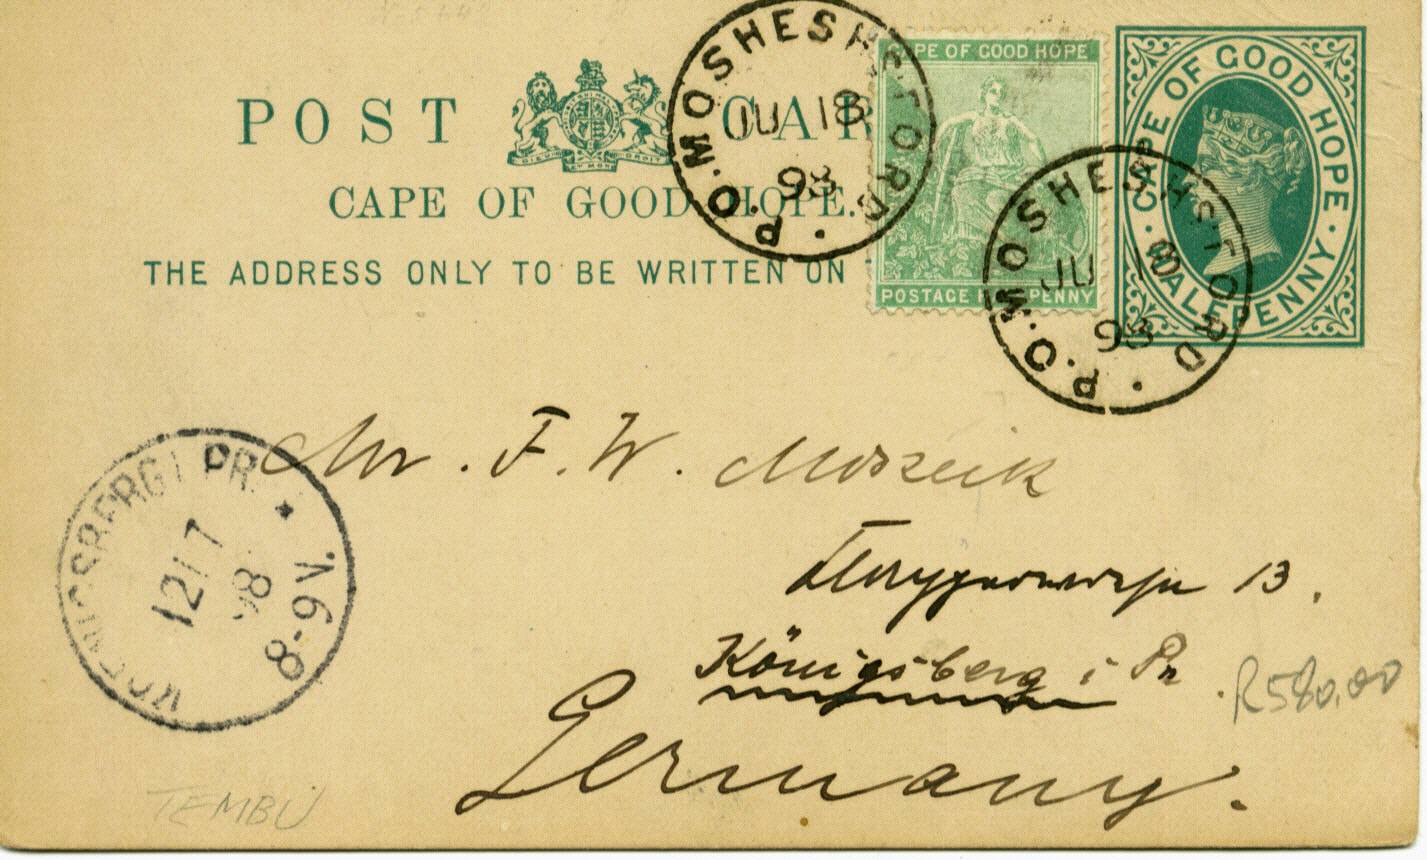 Circular Postmarks of the Cape of Good Hope